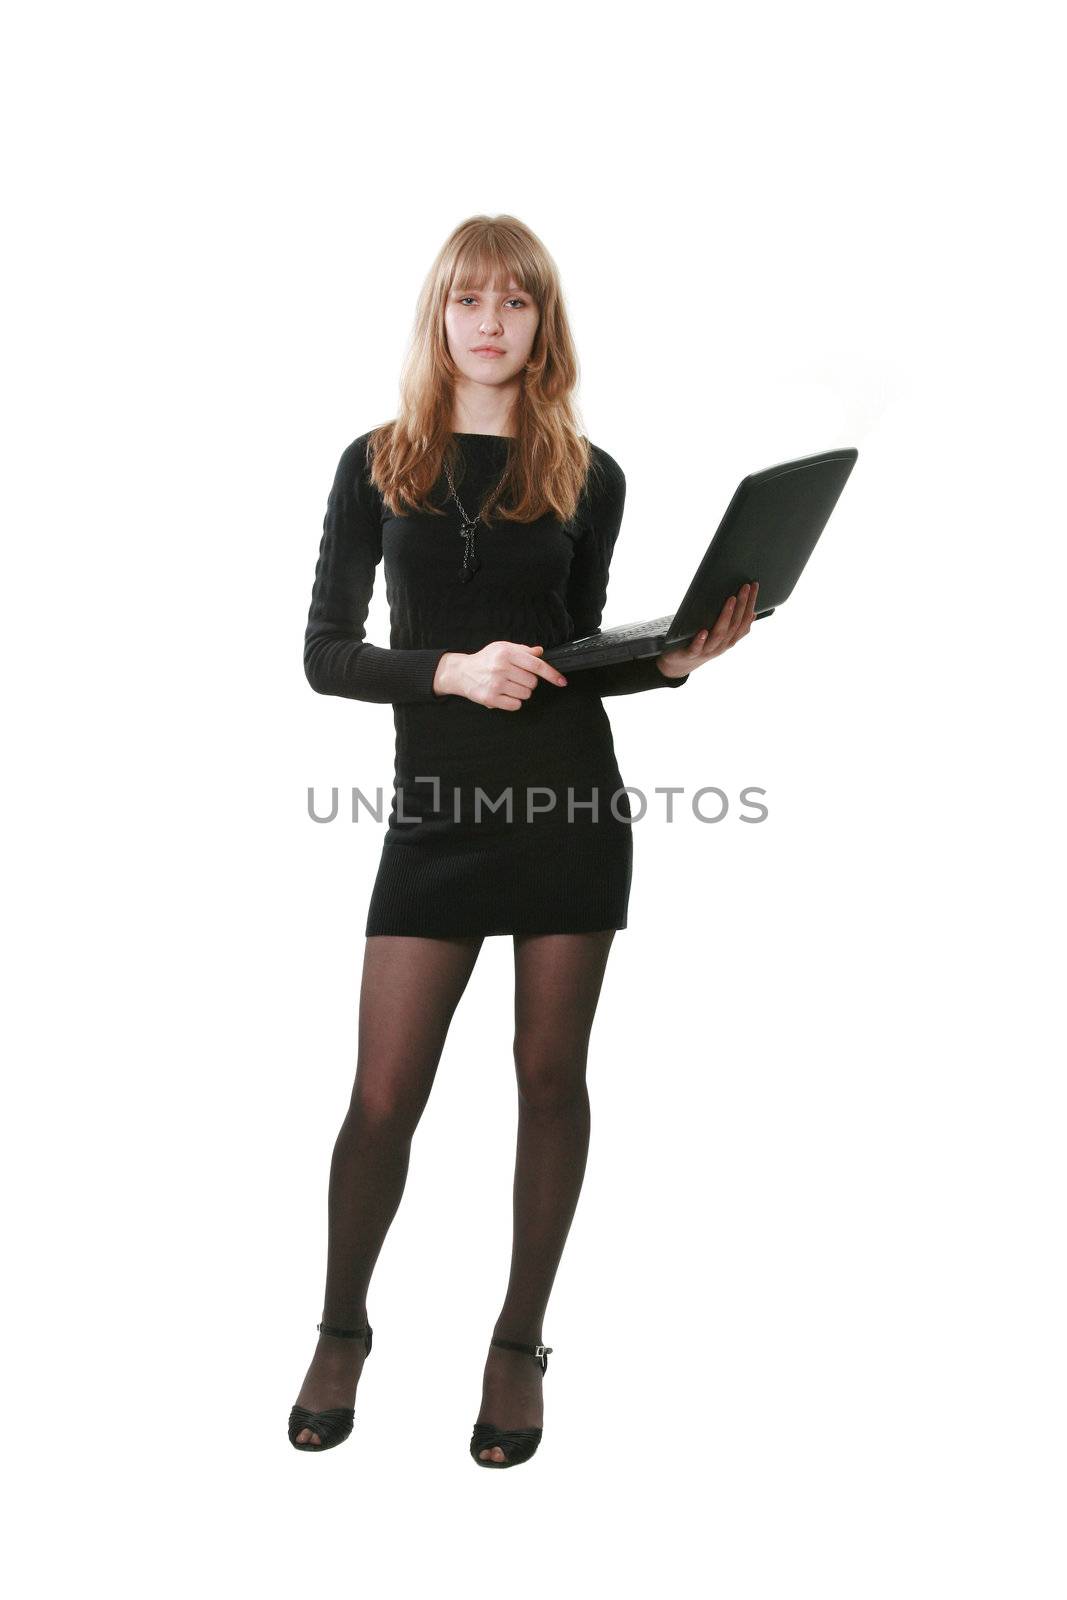 The business woman with a computer on a white background